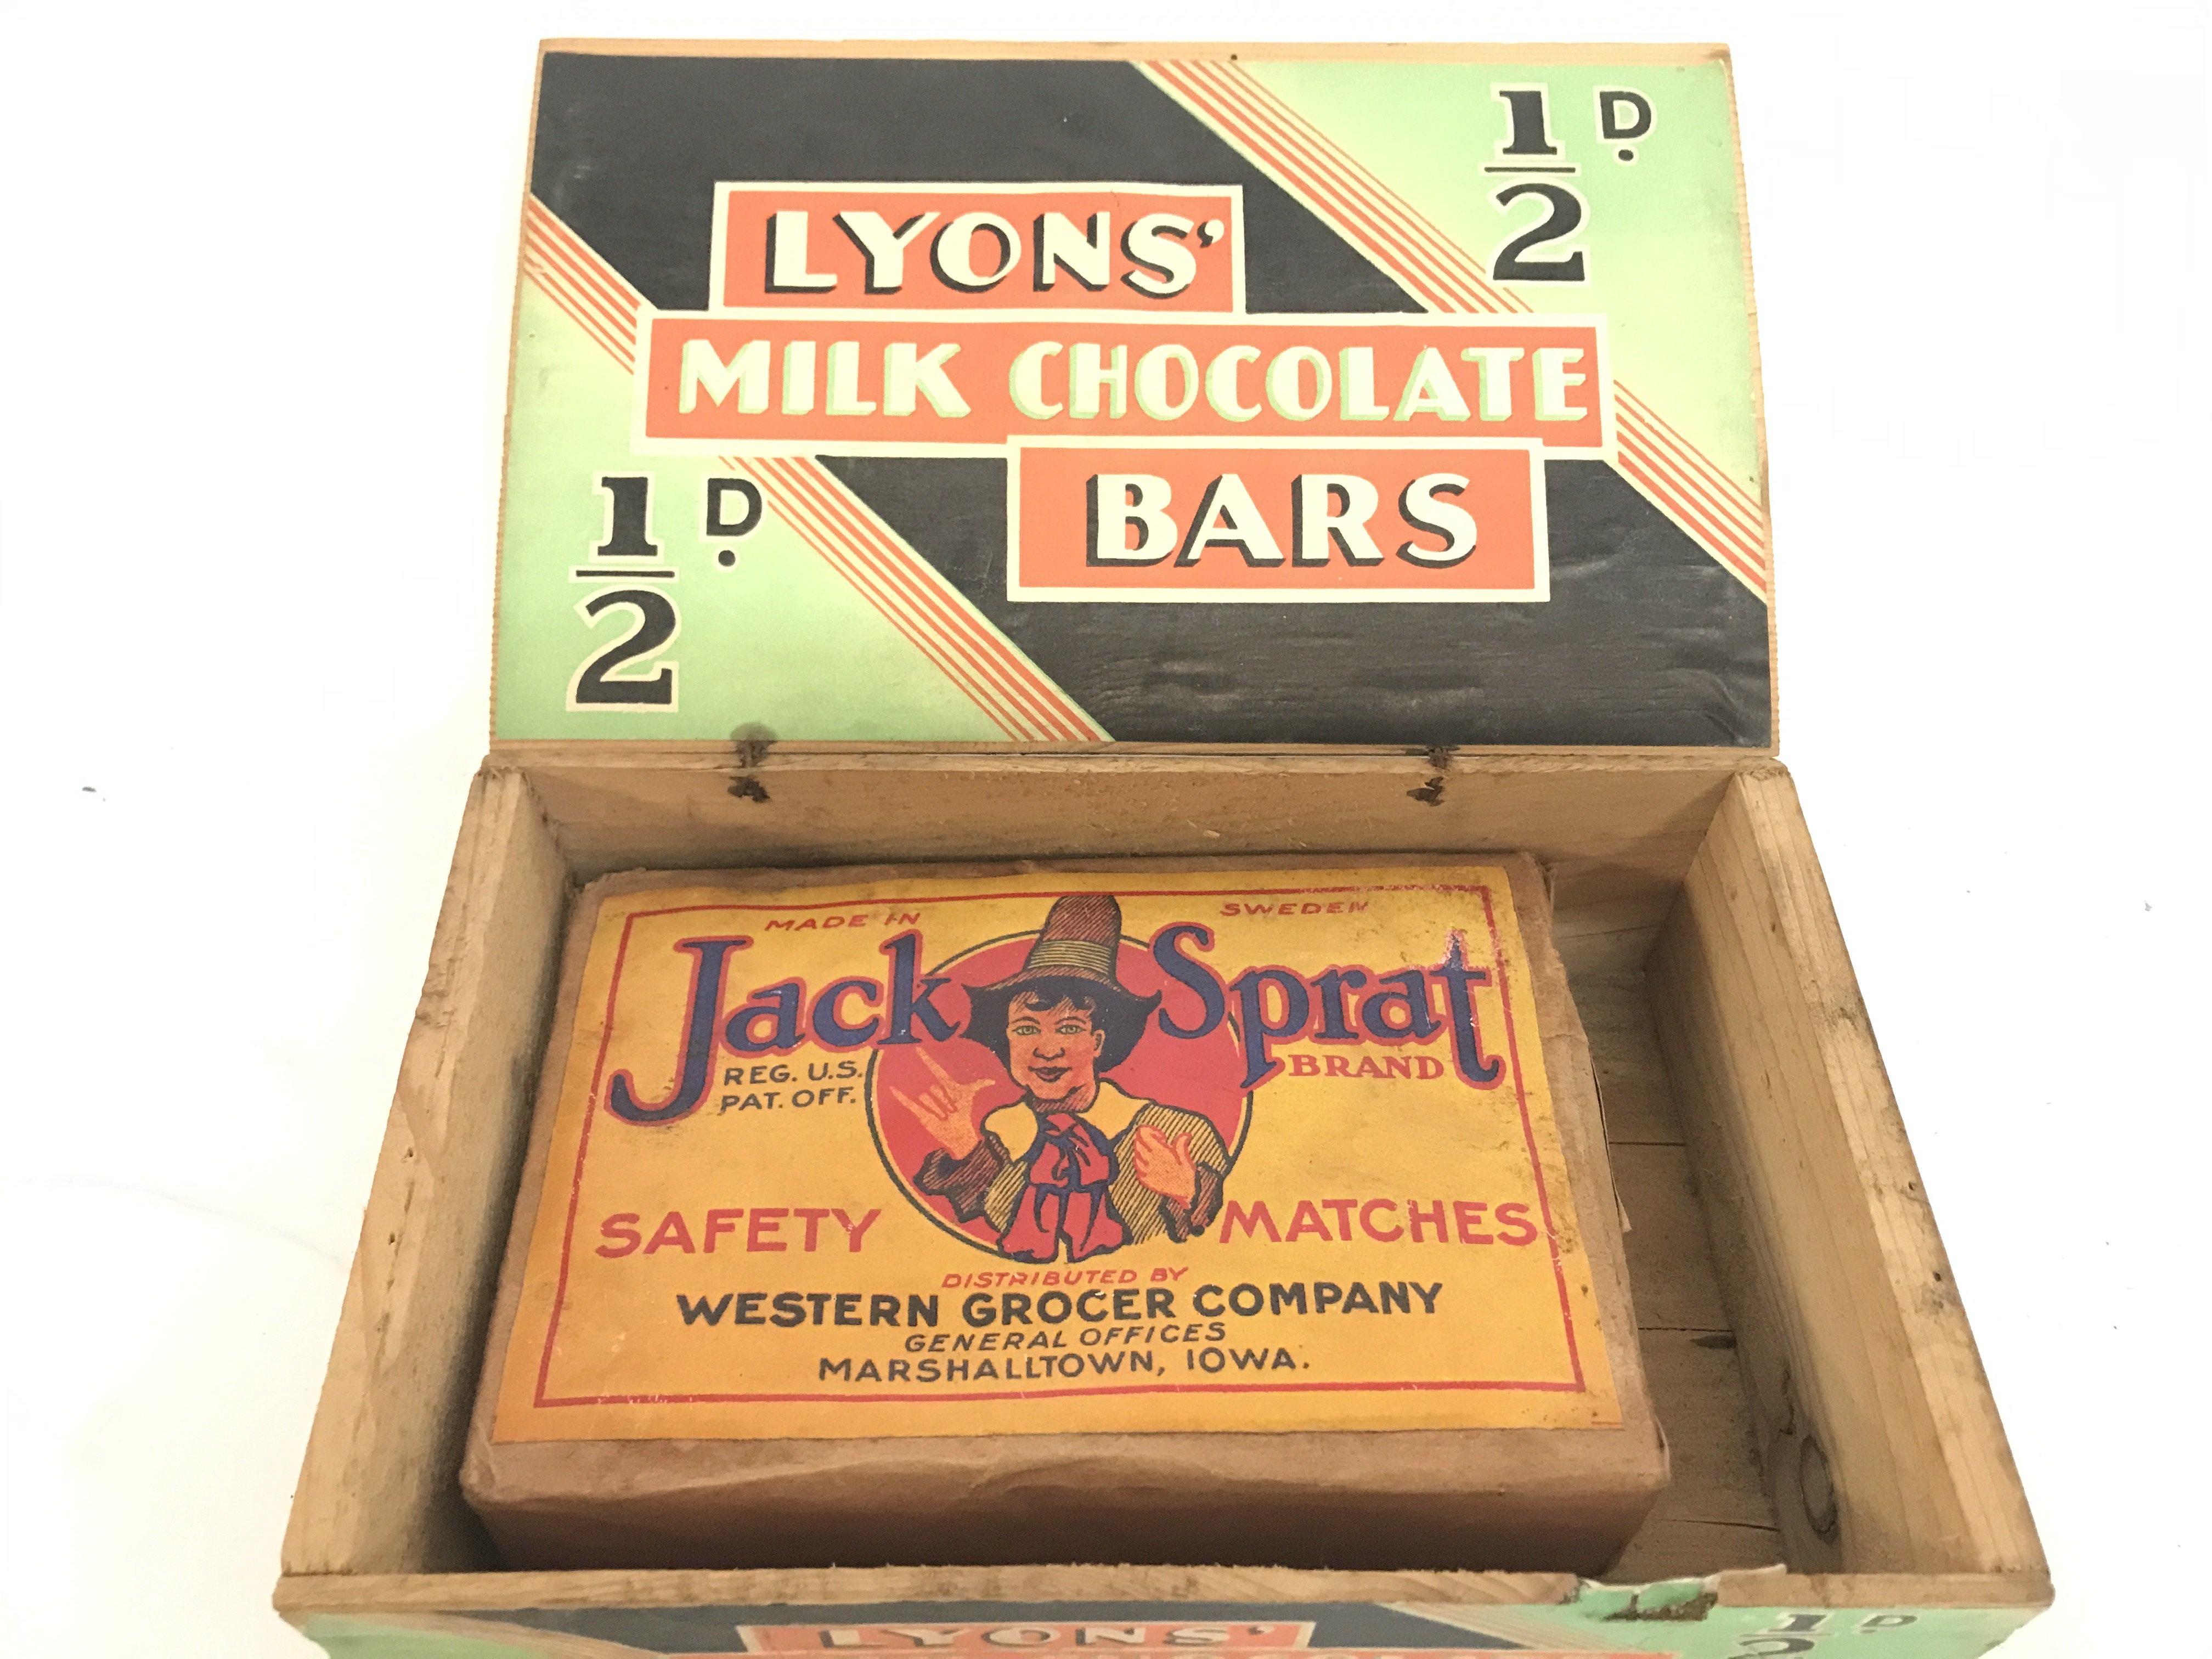 A vintage wooden lyons chocolate bar box and Ameri - Image 2 of 2